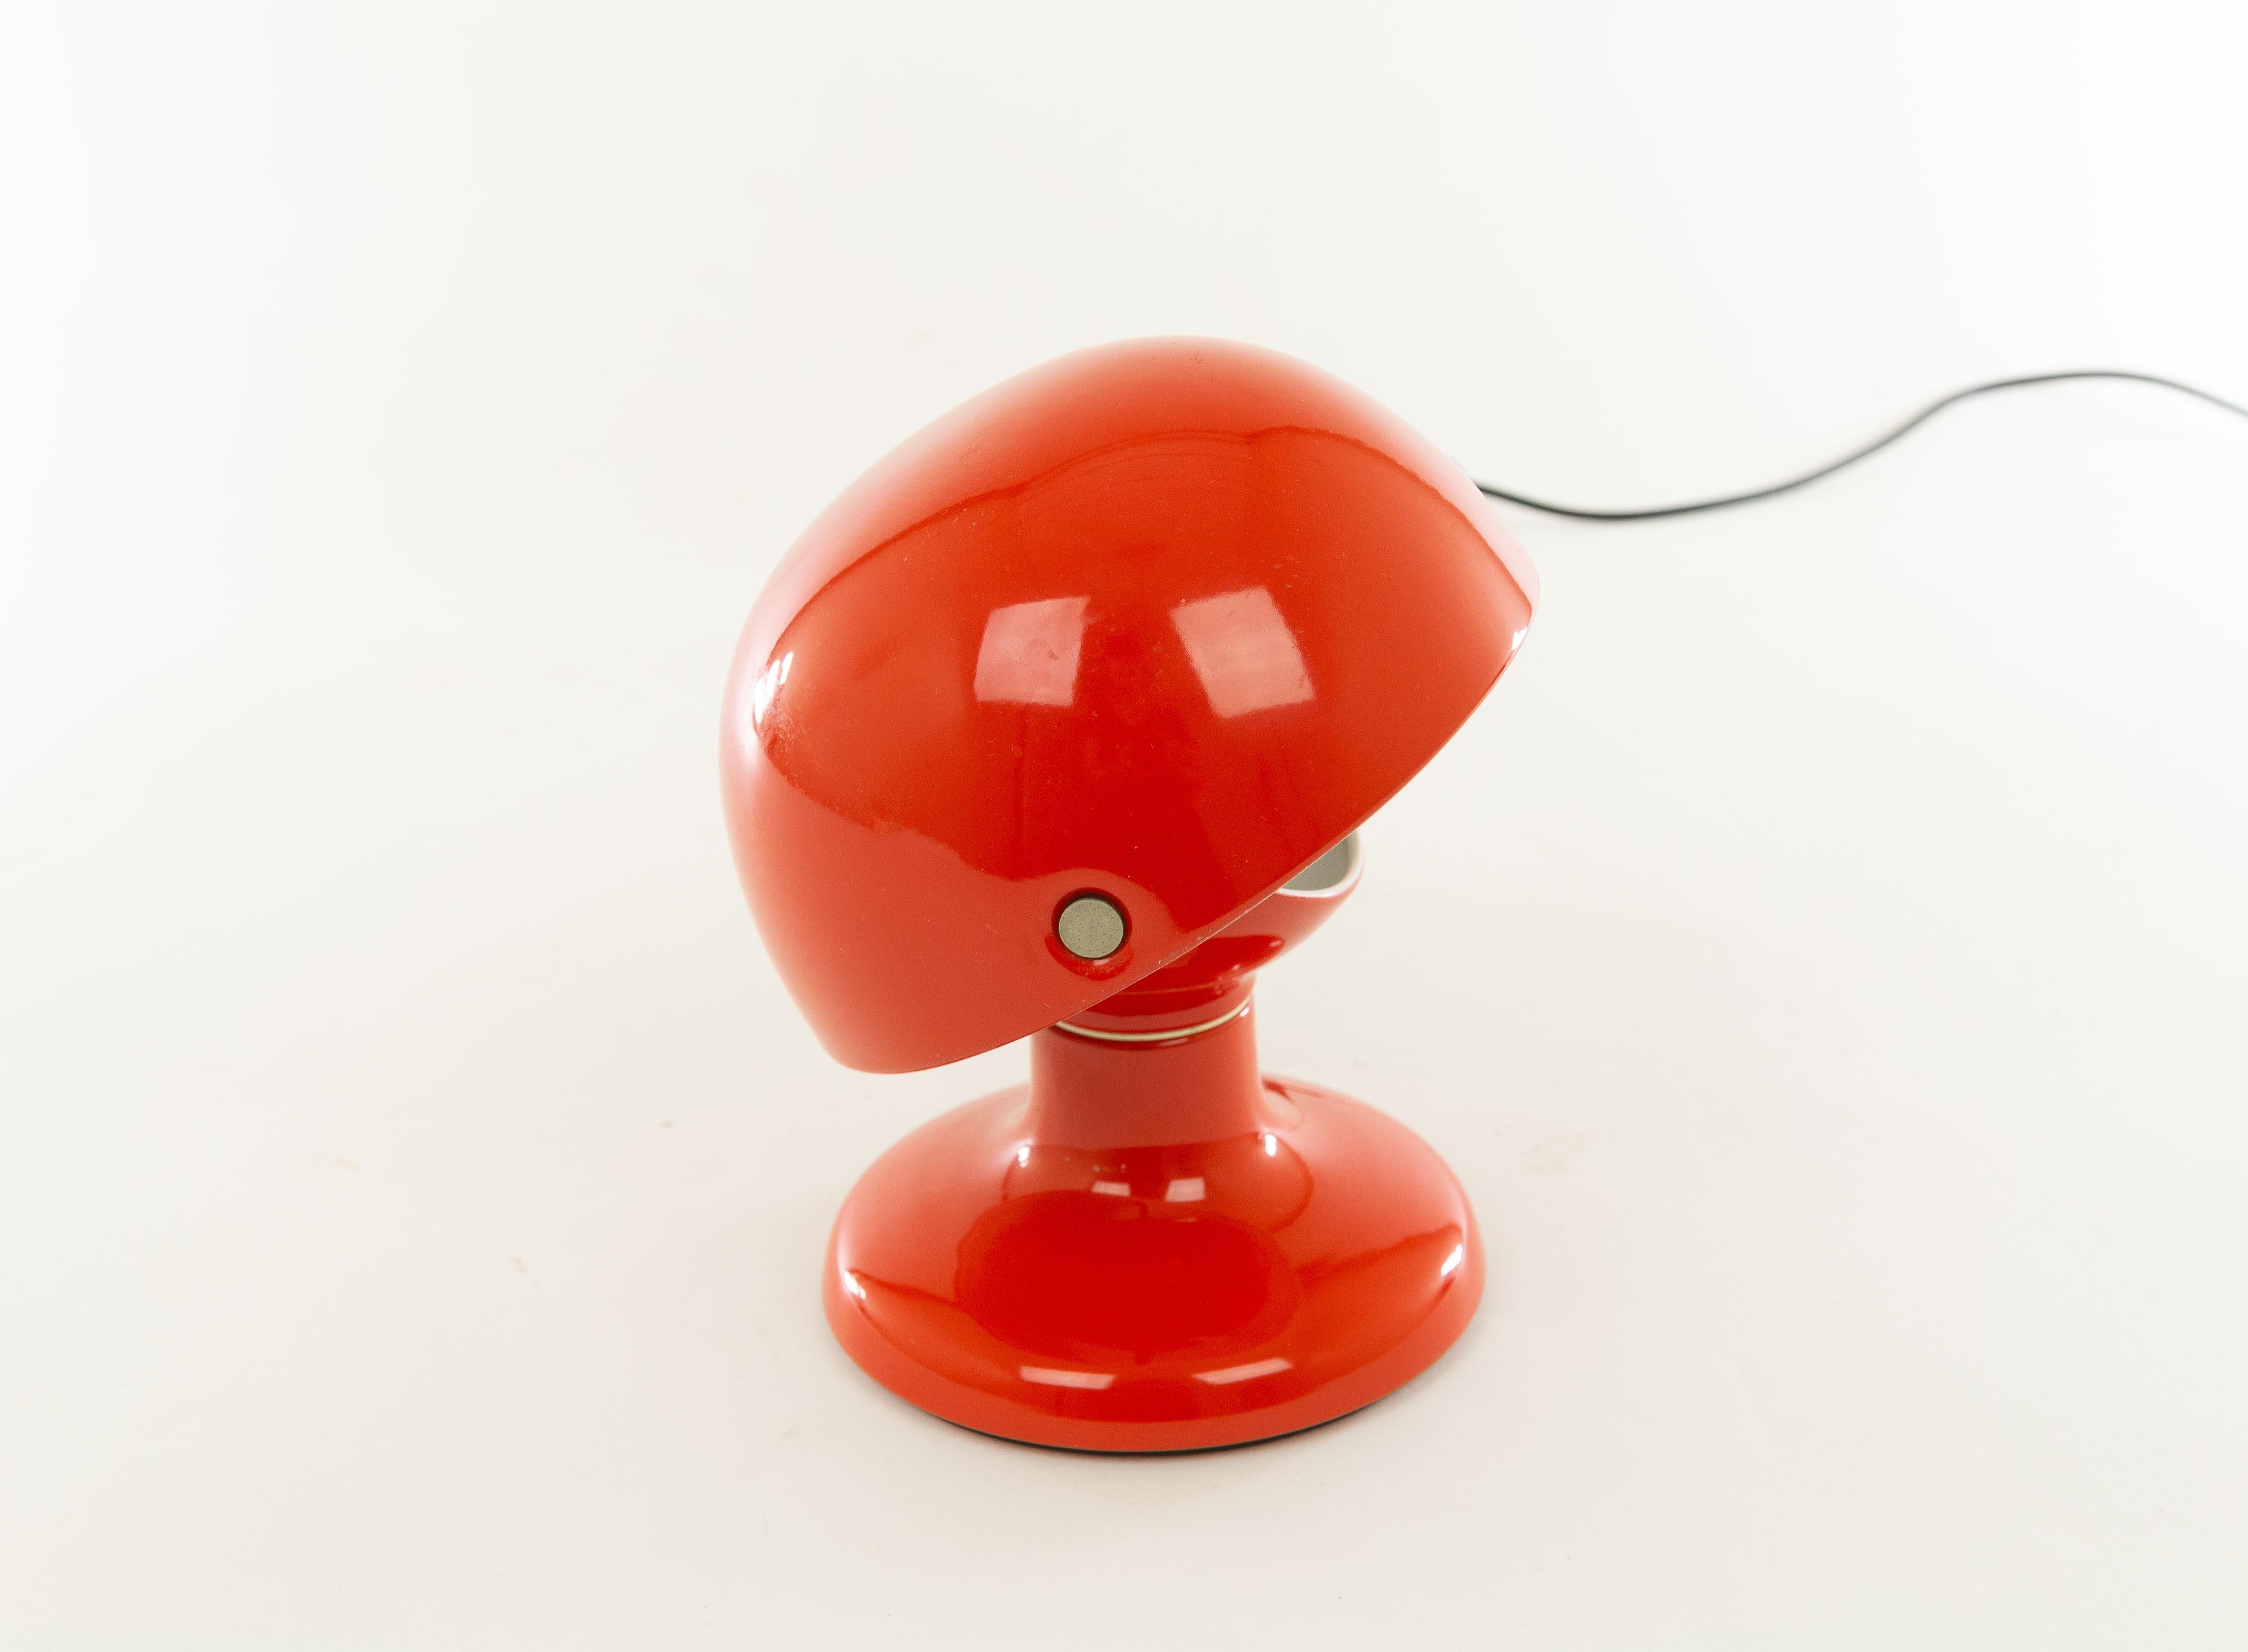 Red Jucker table lamp designed by Tobia Scarpa in 1963 and produced by Flos.

As described in a Flos catalogue: 